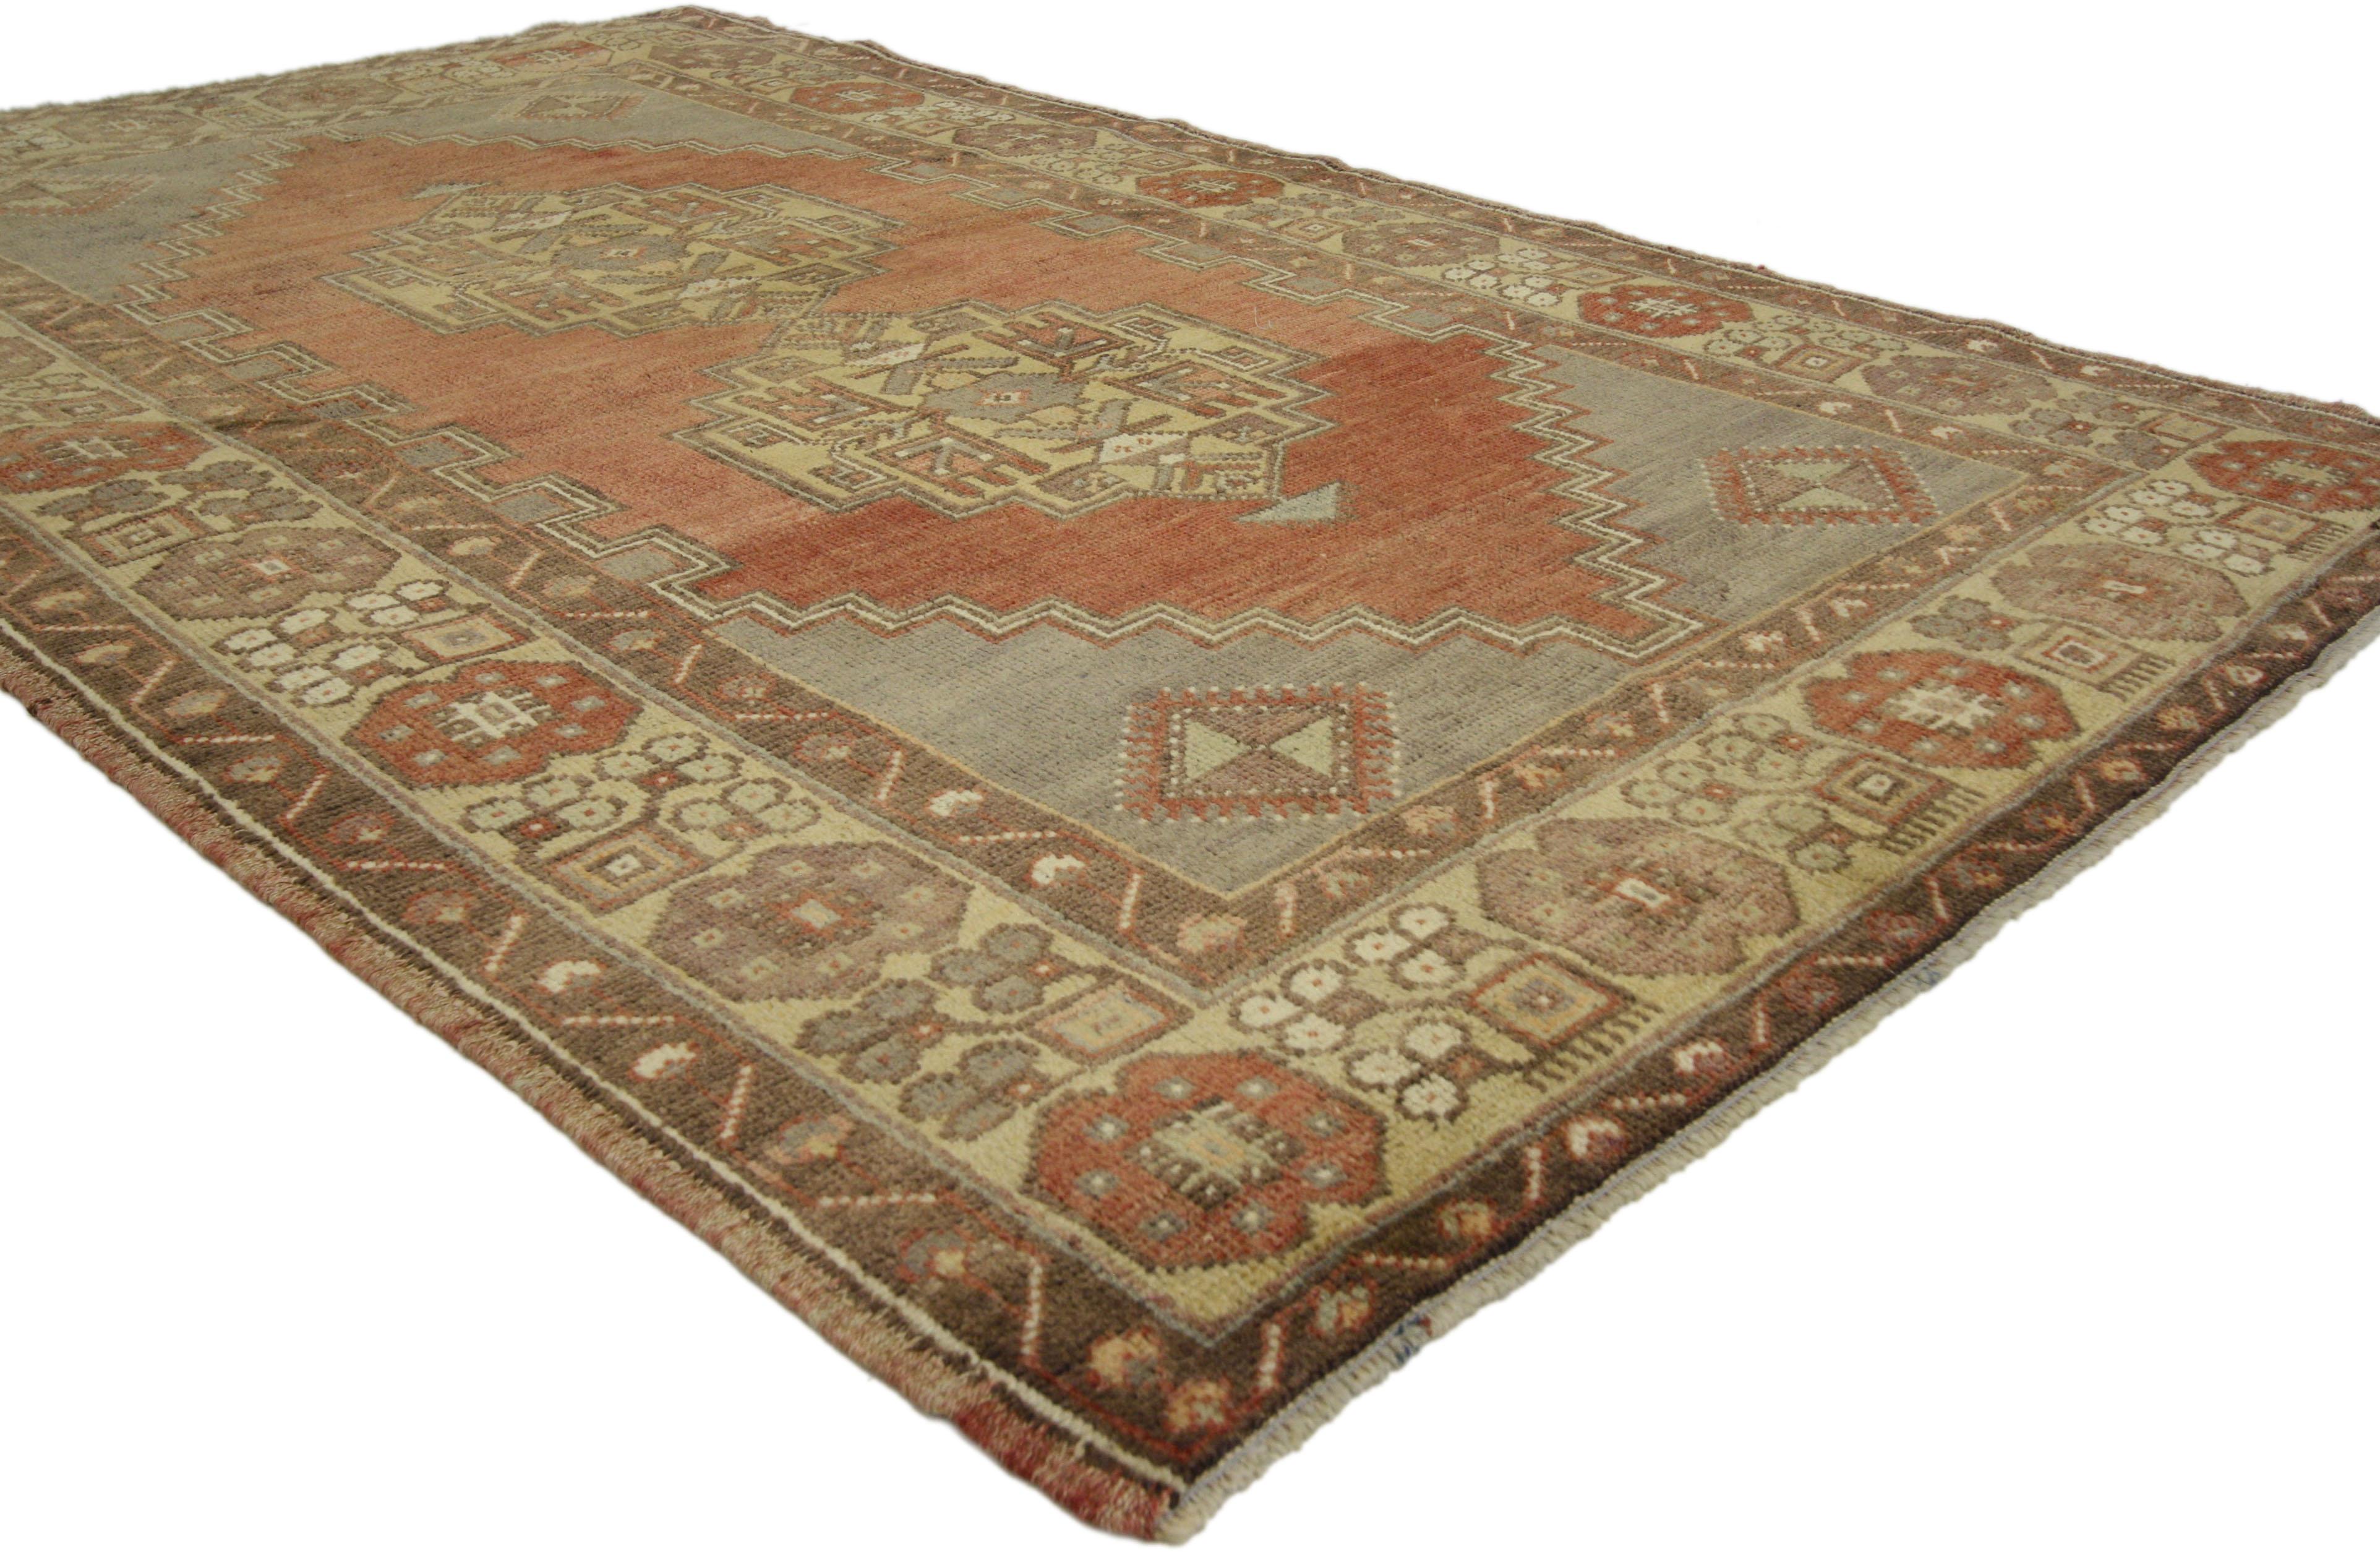 50078 Vintage Turkish Oushak Accent Rug, Entry or Foyer Rug. This hand-knotted wool vintage Turkish Oushak wool rug features a double medallion with tribal motifs in an open abrashed field surrounded by a geometric border. color palette consists of